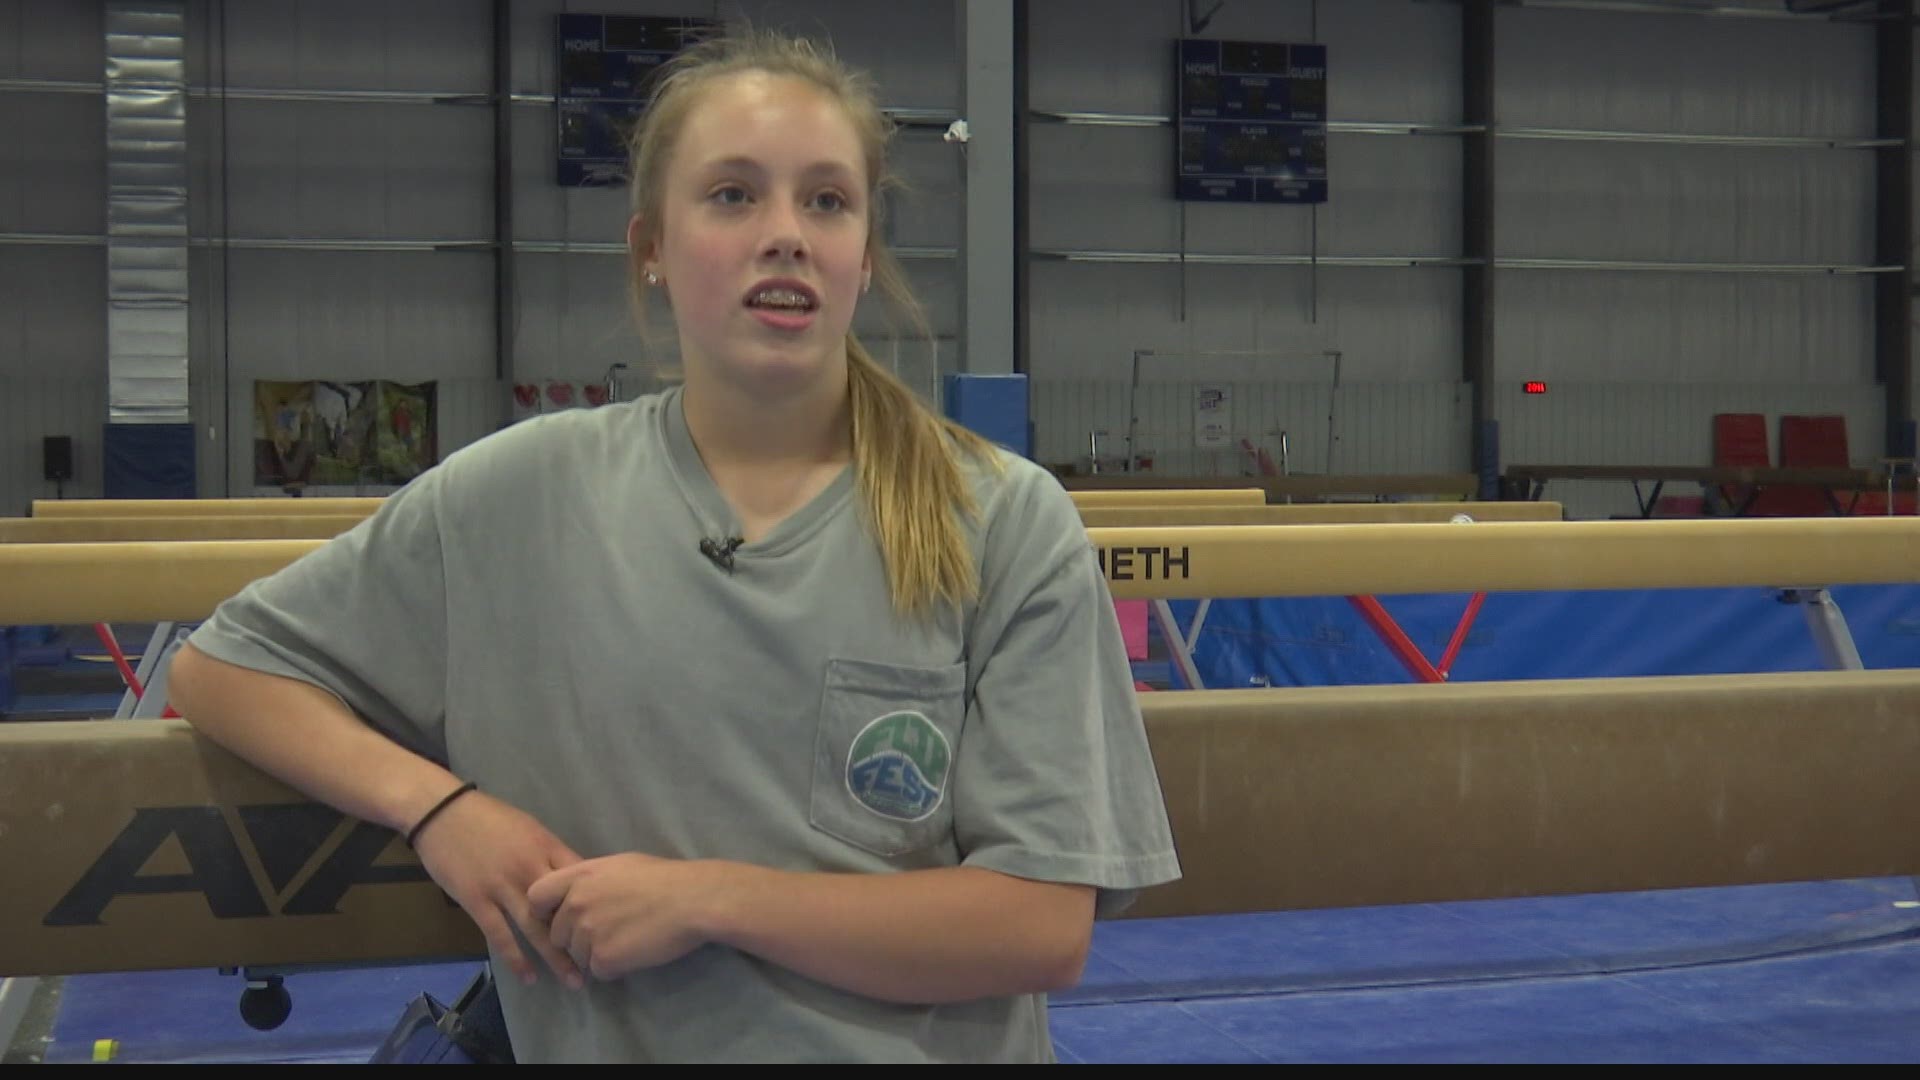 Local gymnasts hopes Simone Biles can participate in the individual competition.